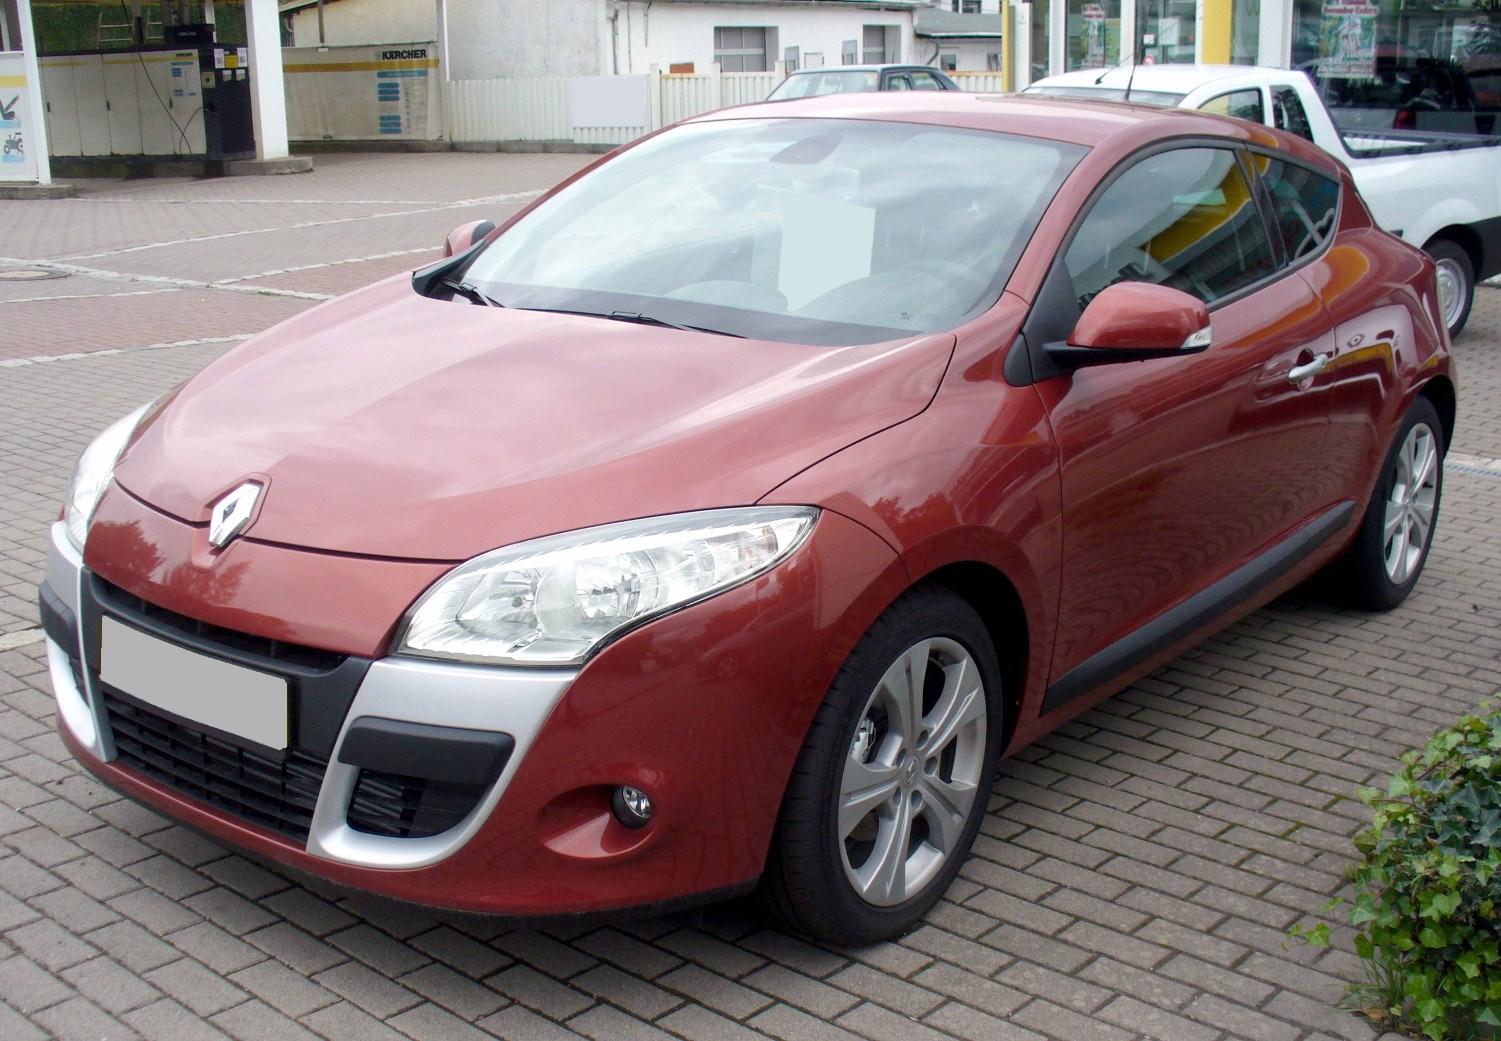 Renault Megane Coupe TCe 130